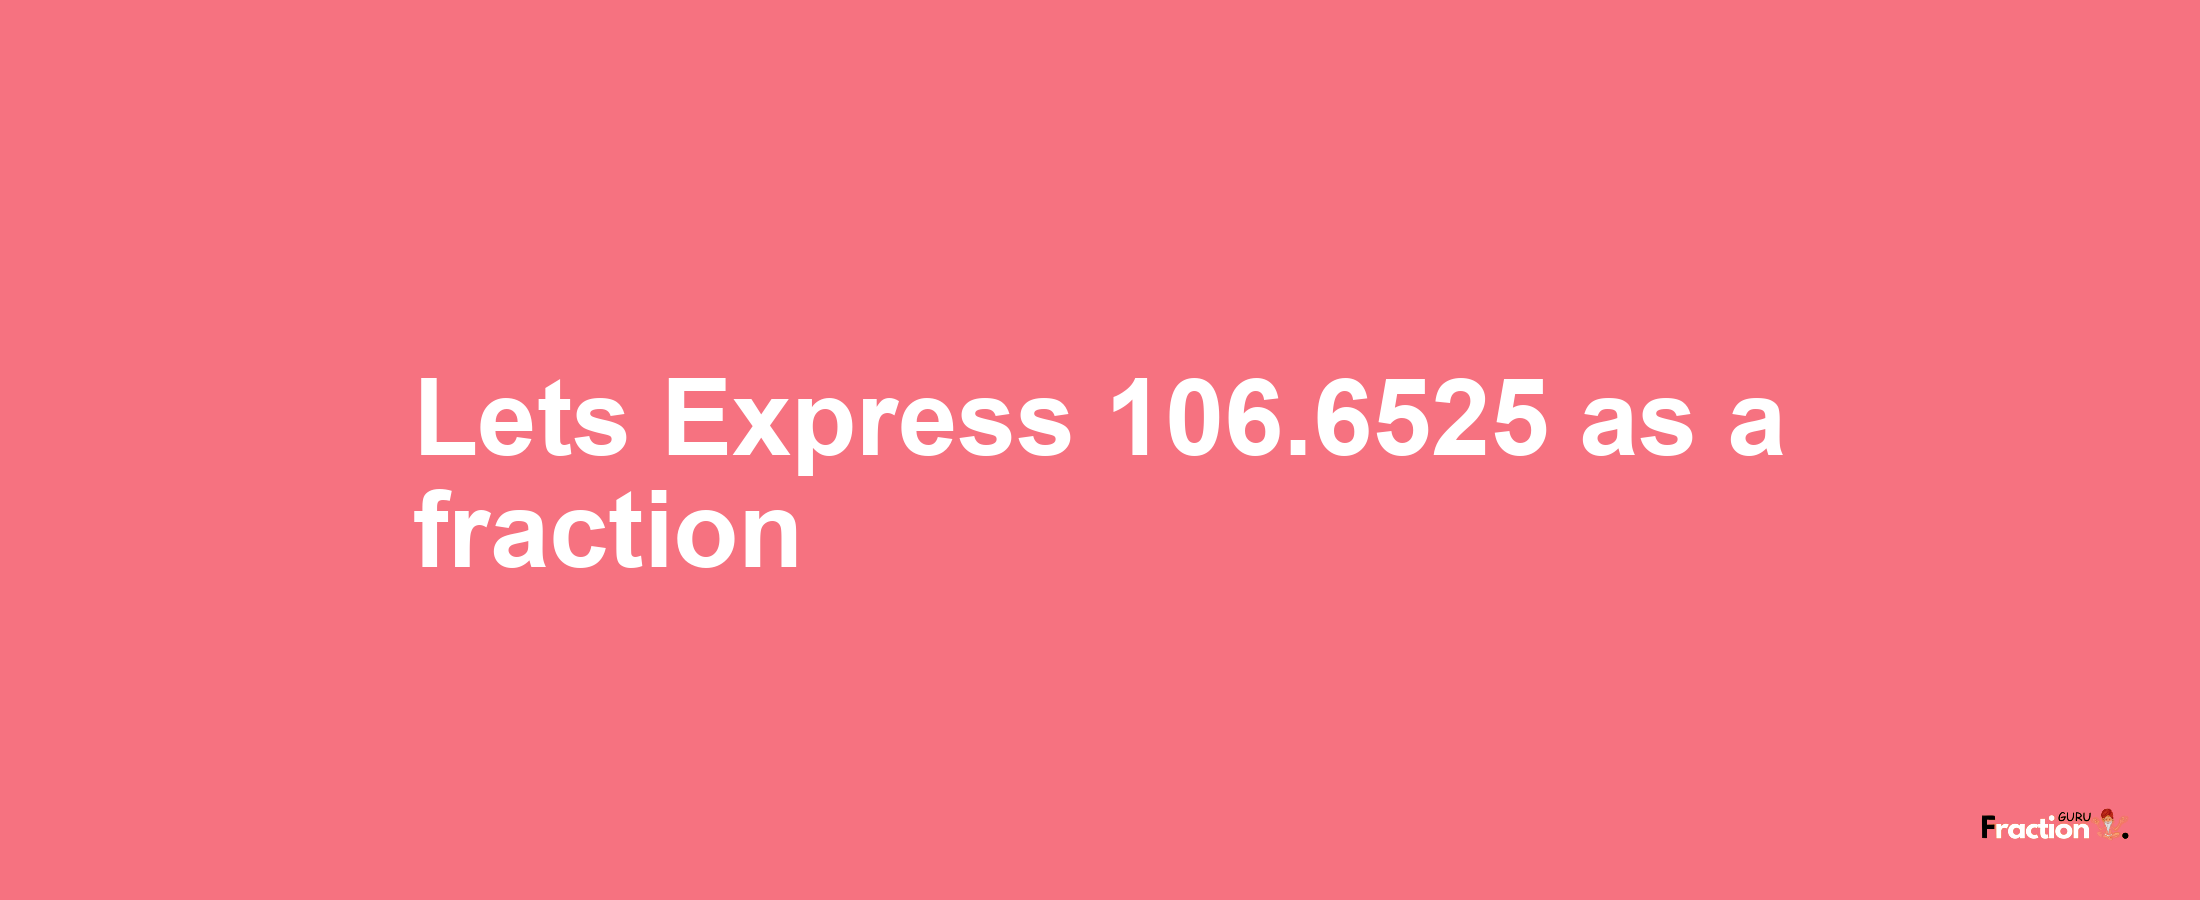 Lets Express 106.6525 as afraction